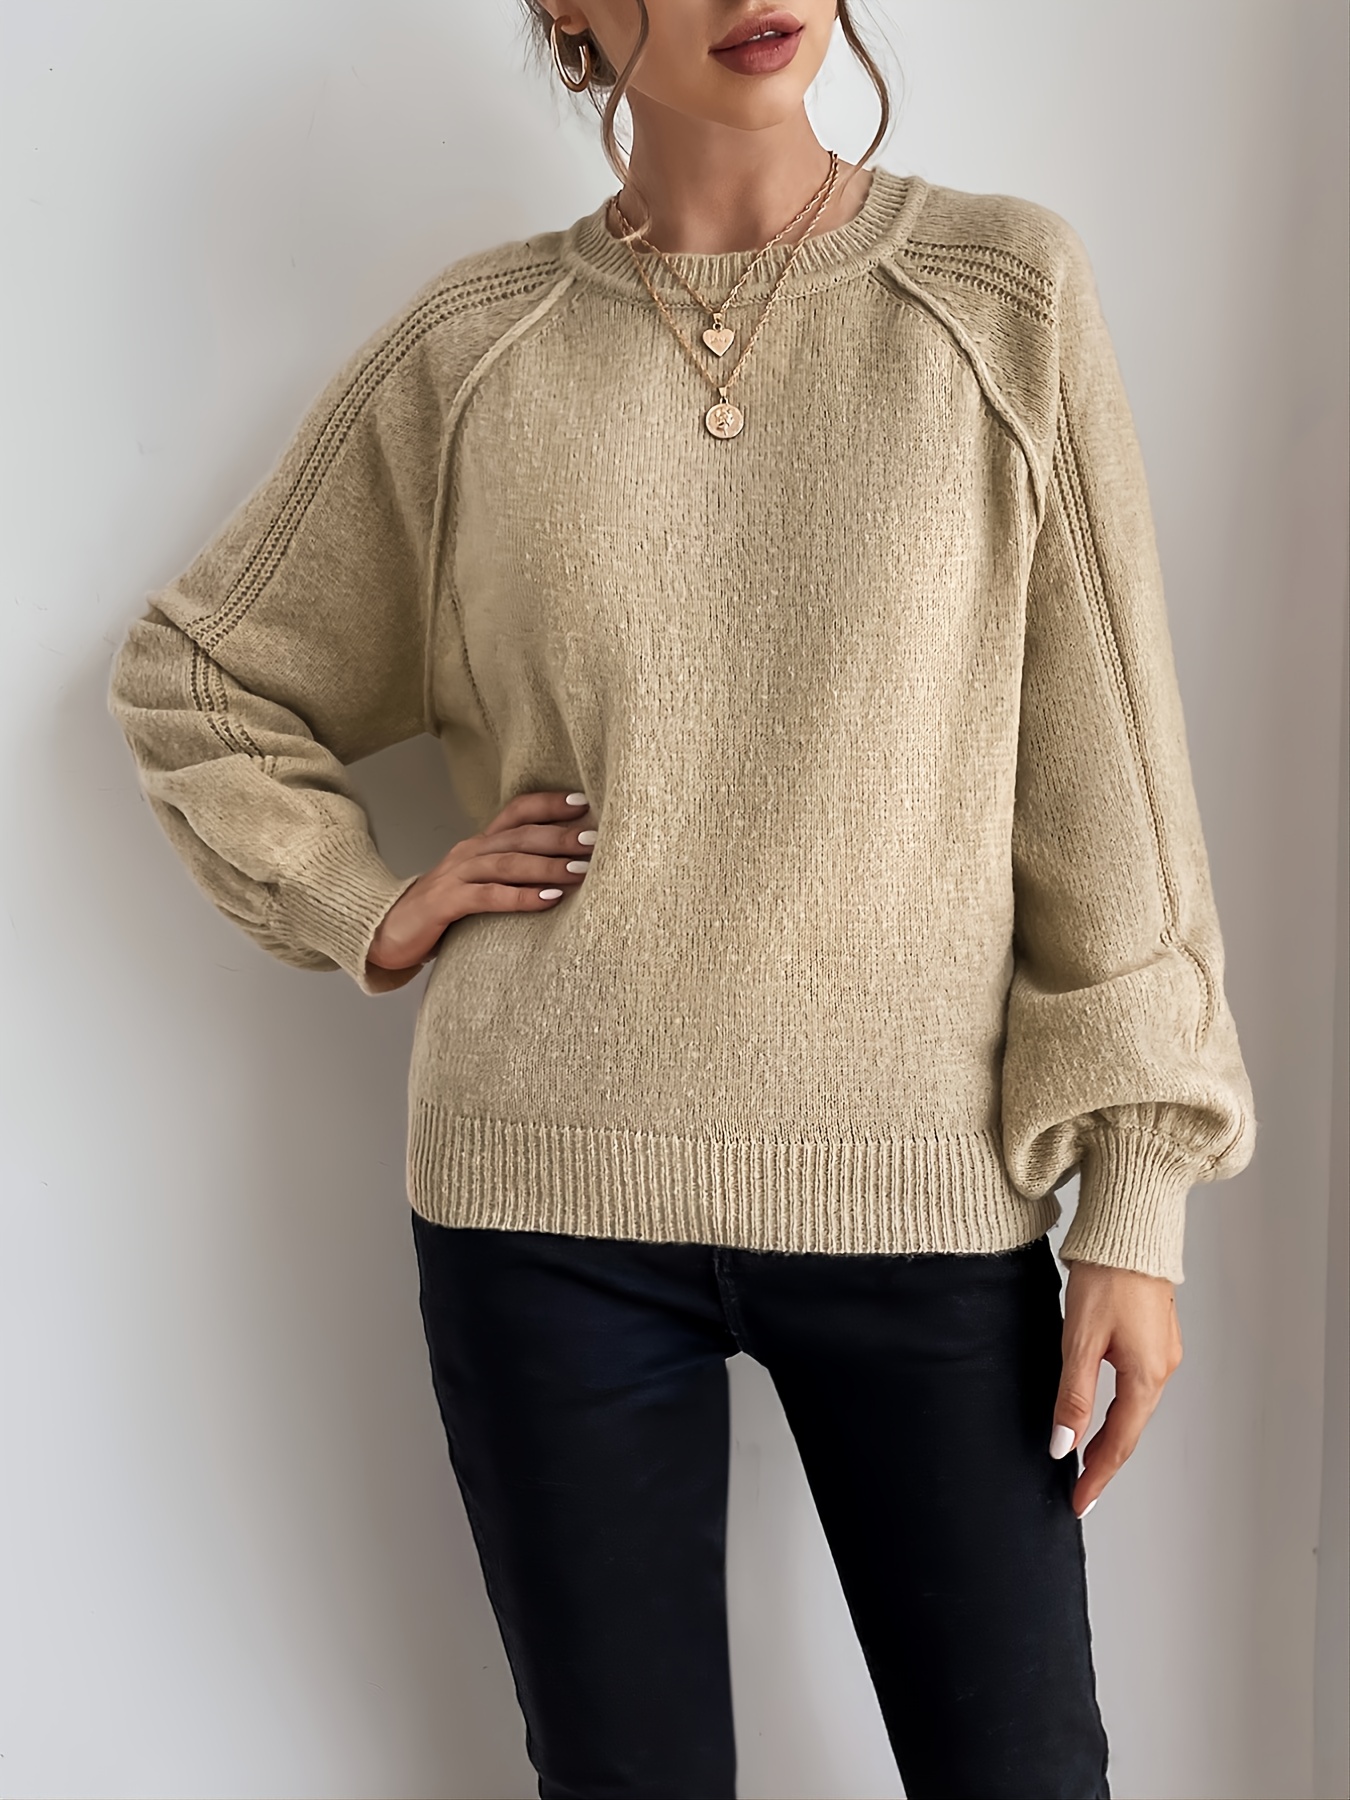 Easy to Sew Drop Shoulder Knit Sweatshirt With Long Sleeve and 